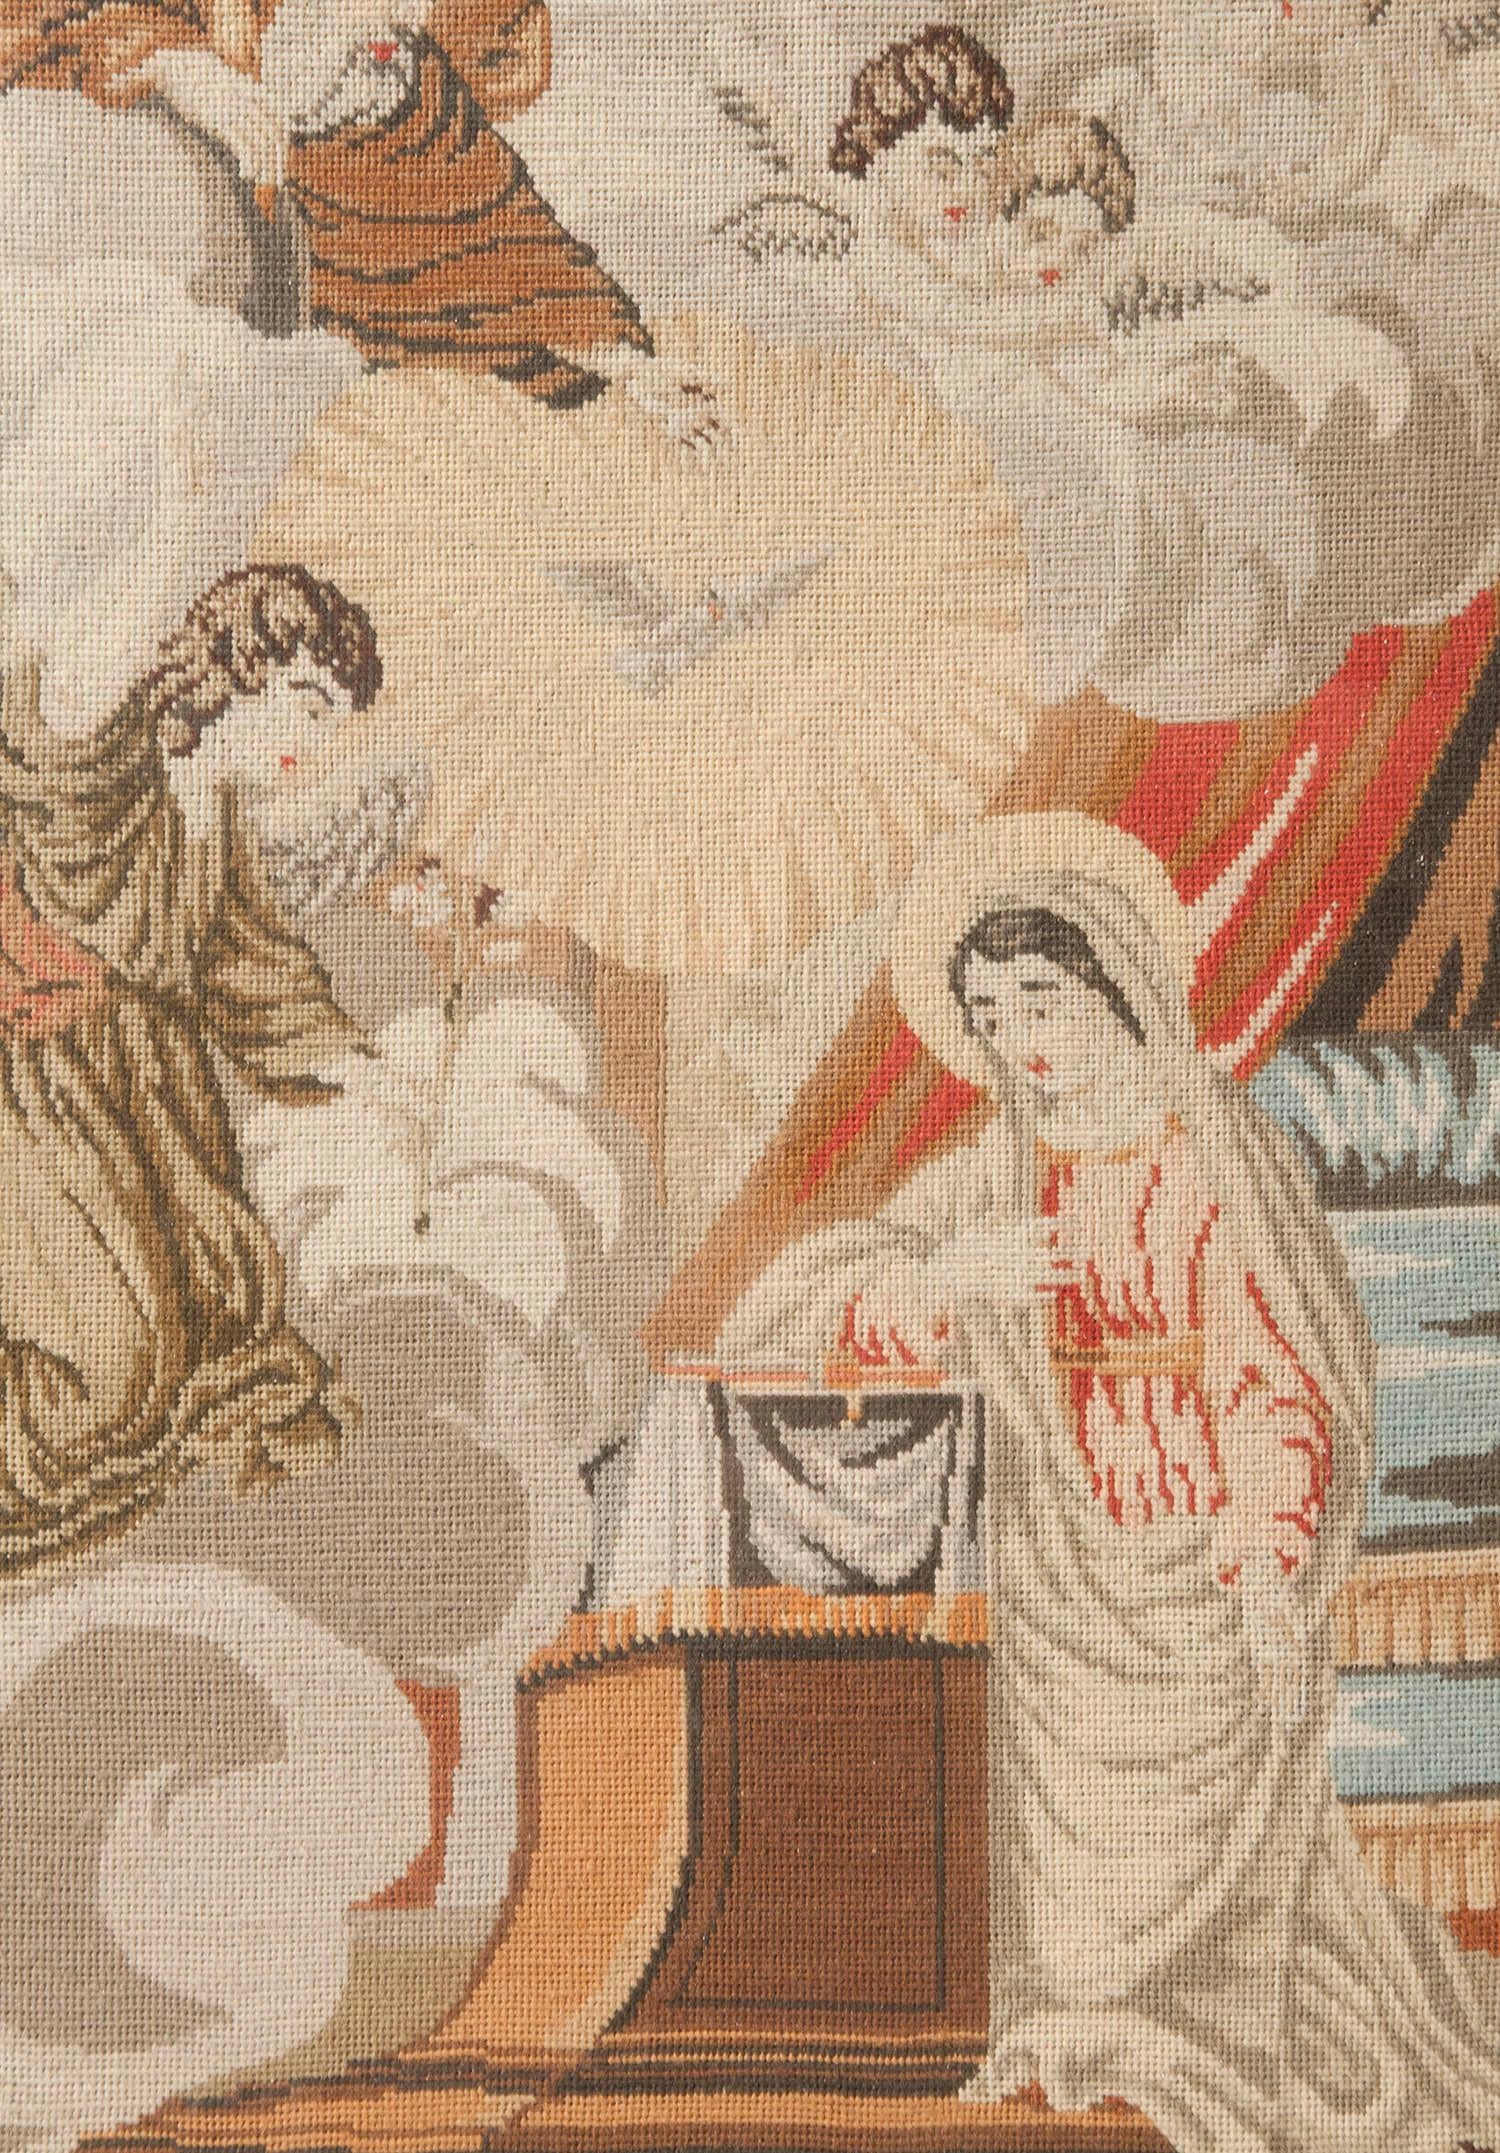 European Annunciation to the Blessed Virgin Mary Needlepoint Tapestry, France, 1850-1870